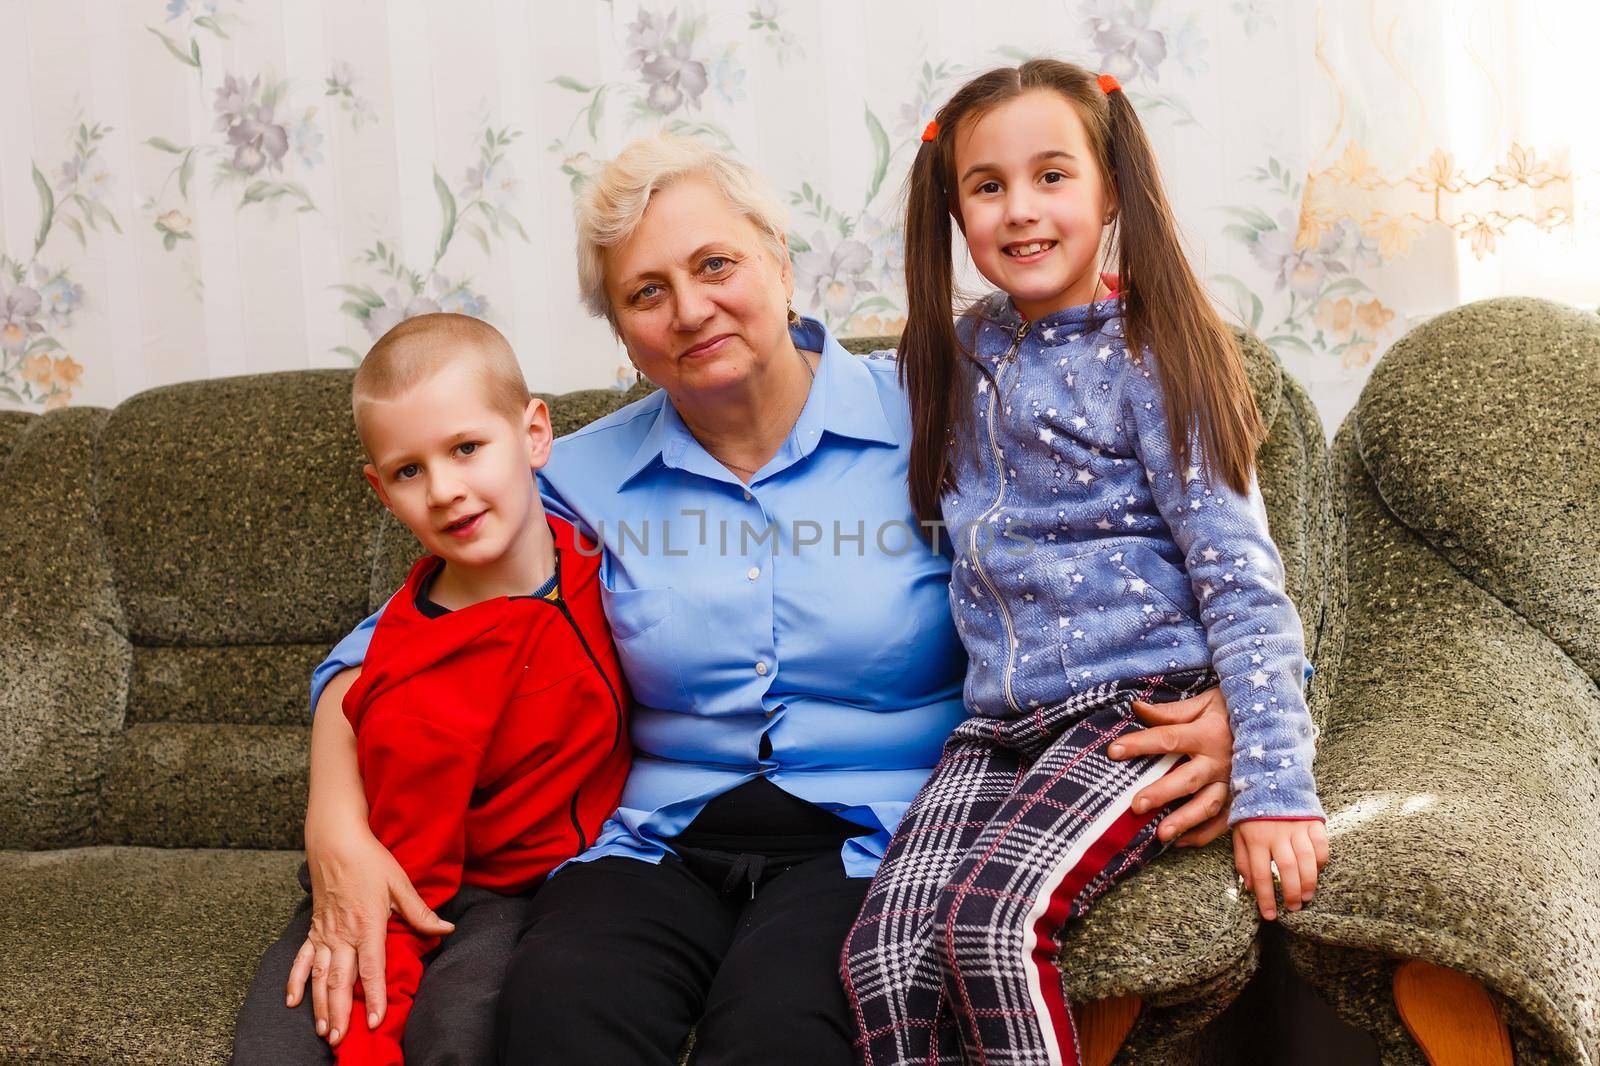 Grown up adult smiling grandchildren embraces elderly grandmother glad to see missing her, visit of loving relatives enjoy communication, cuddle as symbol of connection, love and support concept by Andelov13